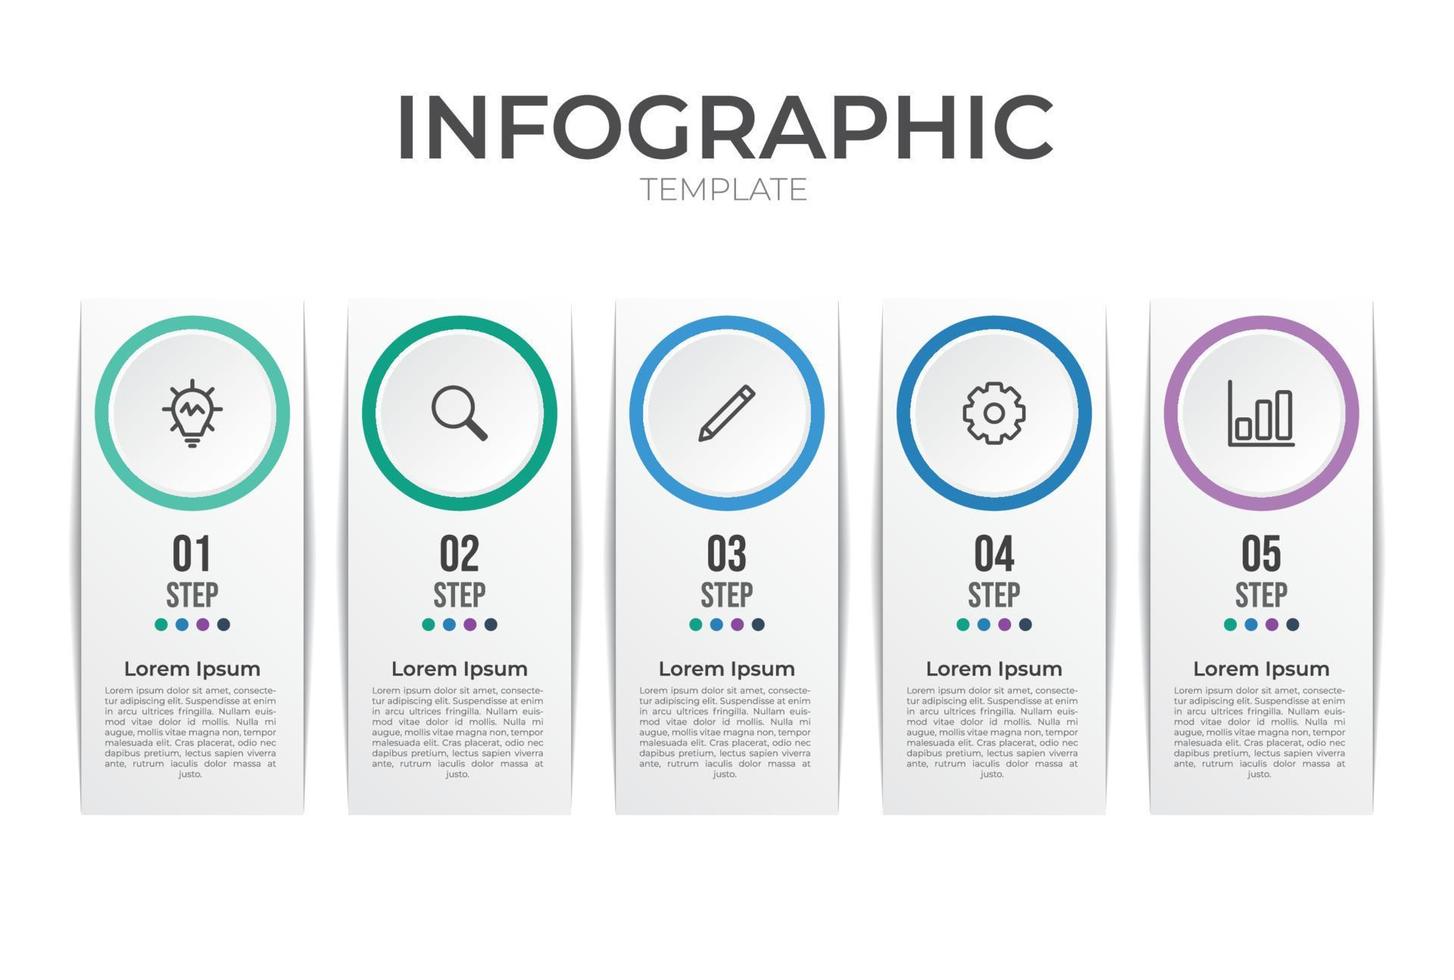 Infographic Element Template with 5 Steps and icons, vector illustration, data visualization, Can use for workflow, timeline, banner, brochure, presentation slide, etc.